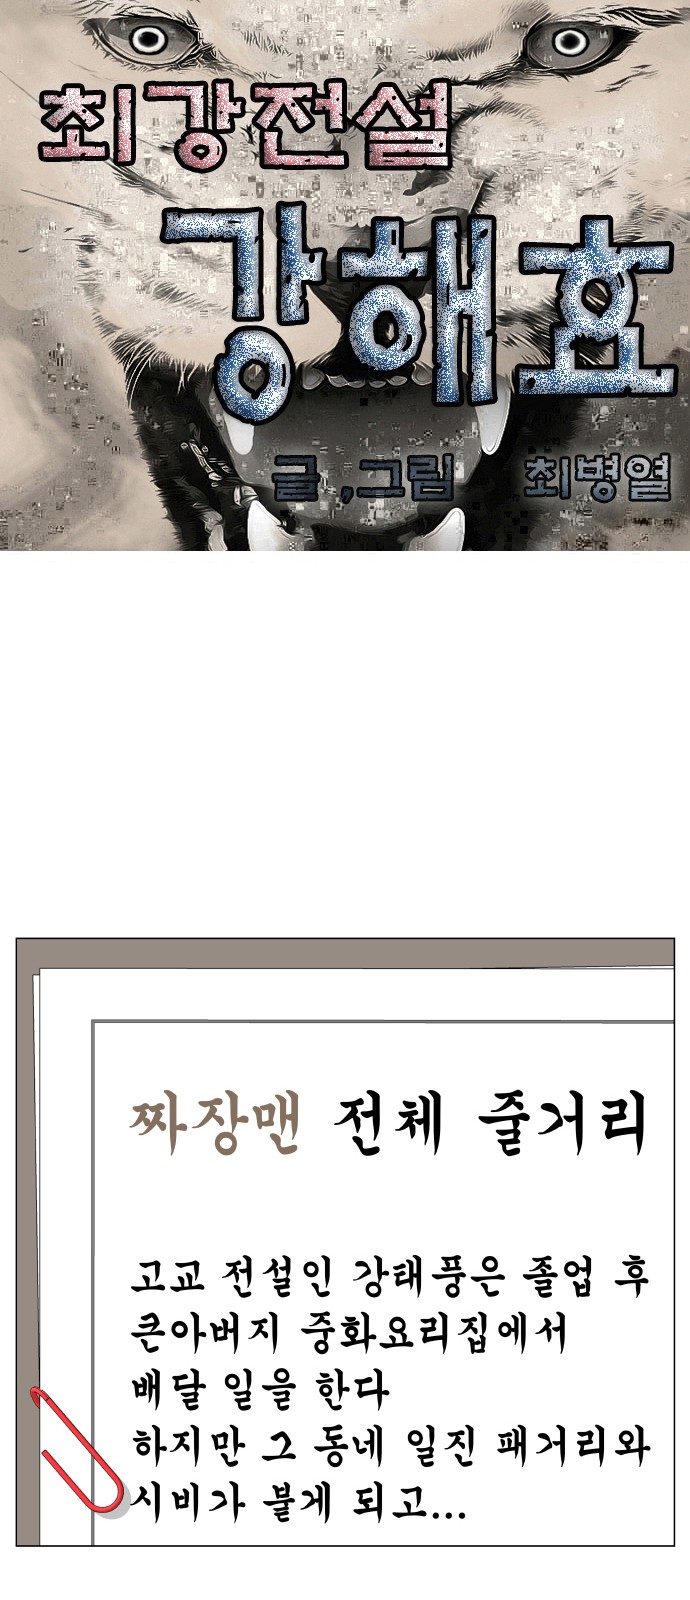 Ultimate Legend - Kang Hae Hyo - Chapter 406 - Page 1